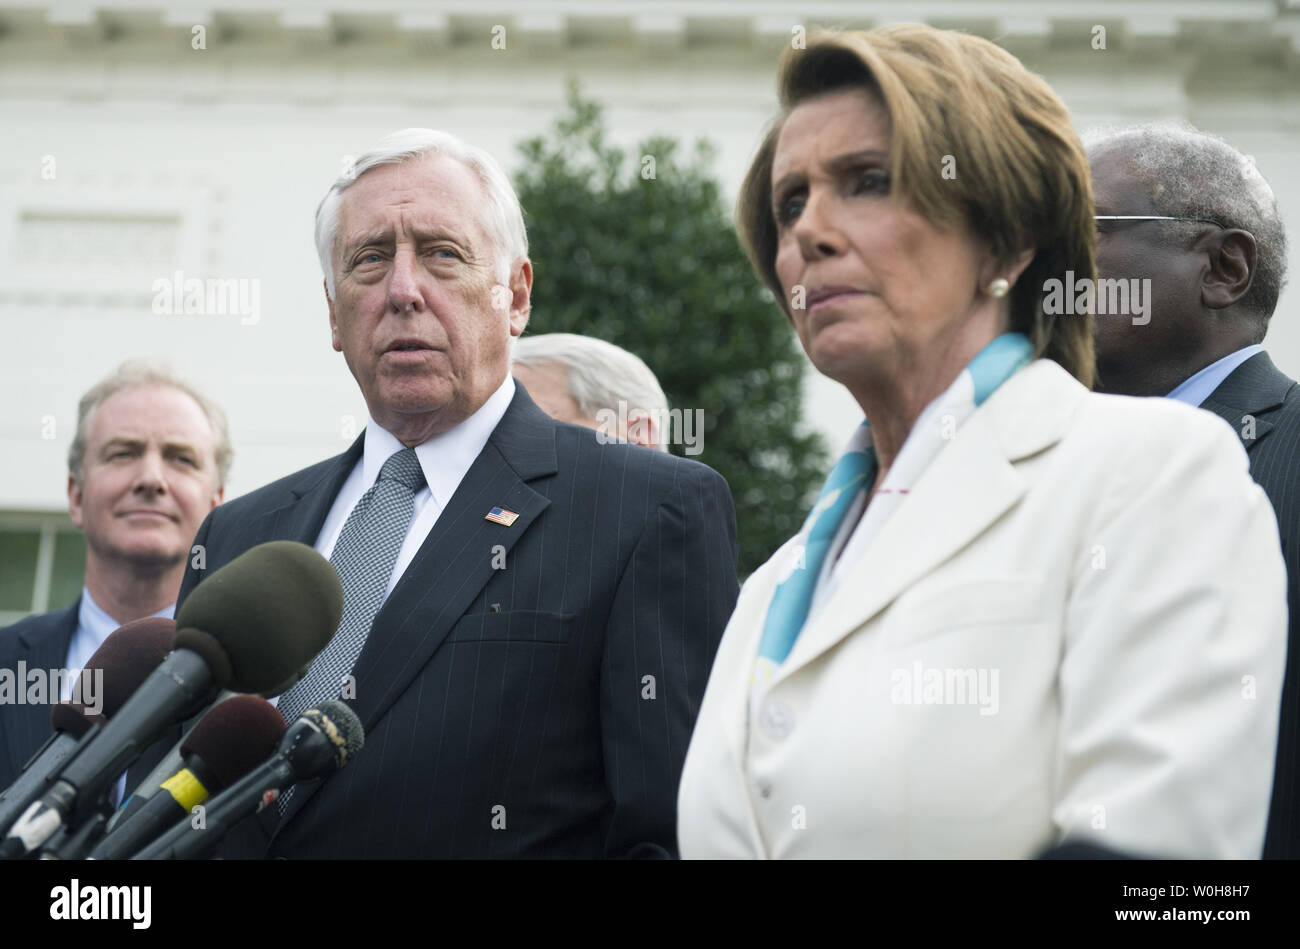 House Minority Whip Steny Hoyer (D-MD) speaks to the media following a meeting with President Barack Obama on the debt limit and reopening the government at the White House in Washington, D.C. on October 15, 2013. Hoyer was joined by Rep. Chris Van Hollen (D-MD) (L) and House Minority Leader Nancy Pelosi (D-MD). UPI/Kevin Dietsch Stock Photo